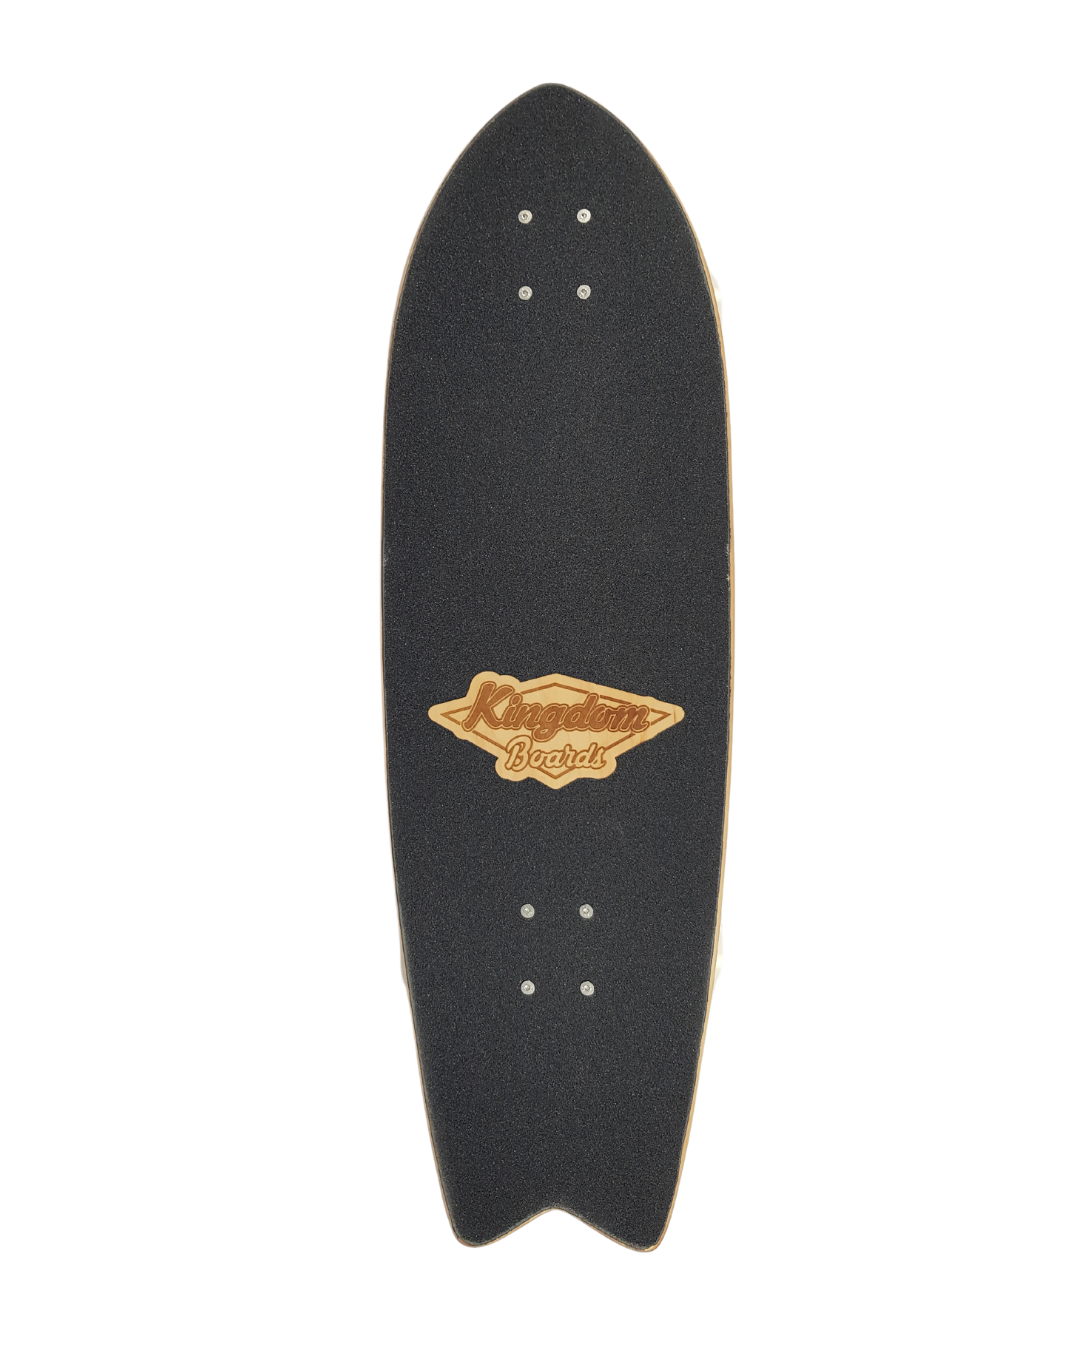 Swallow Tail  31.5” - Surf Skate - Complete